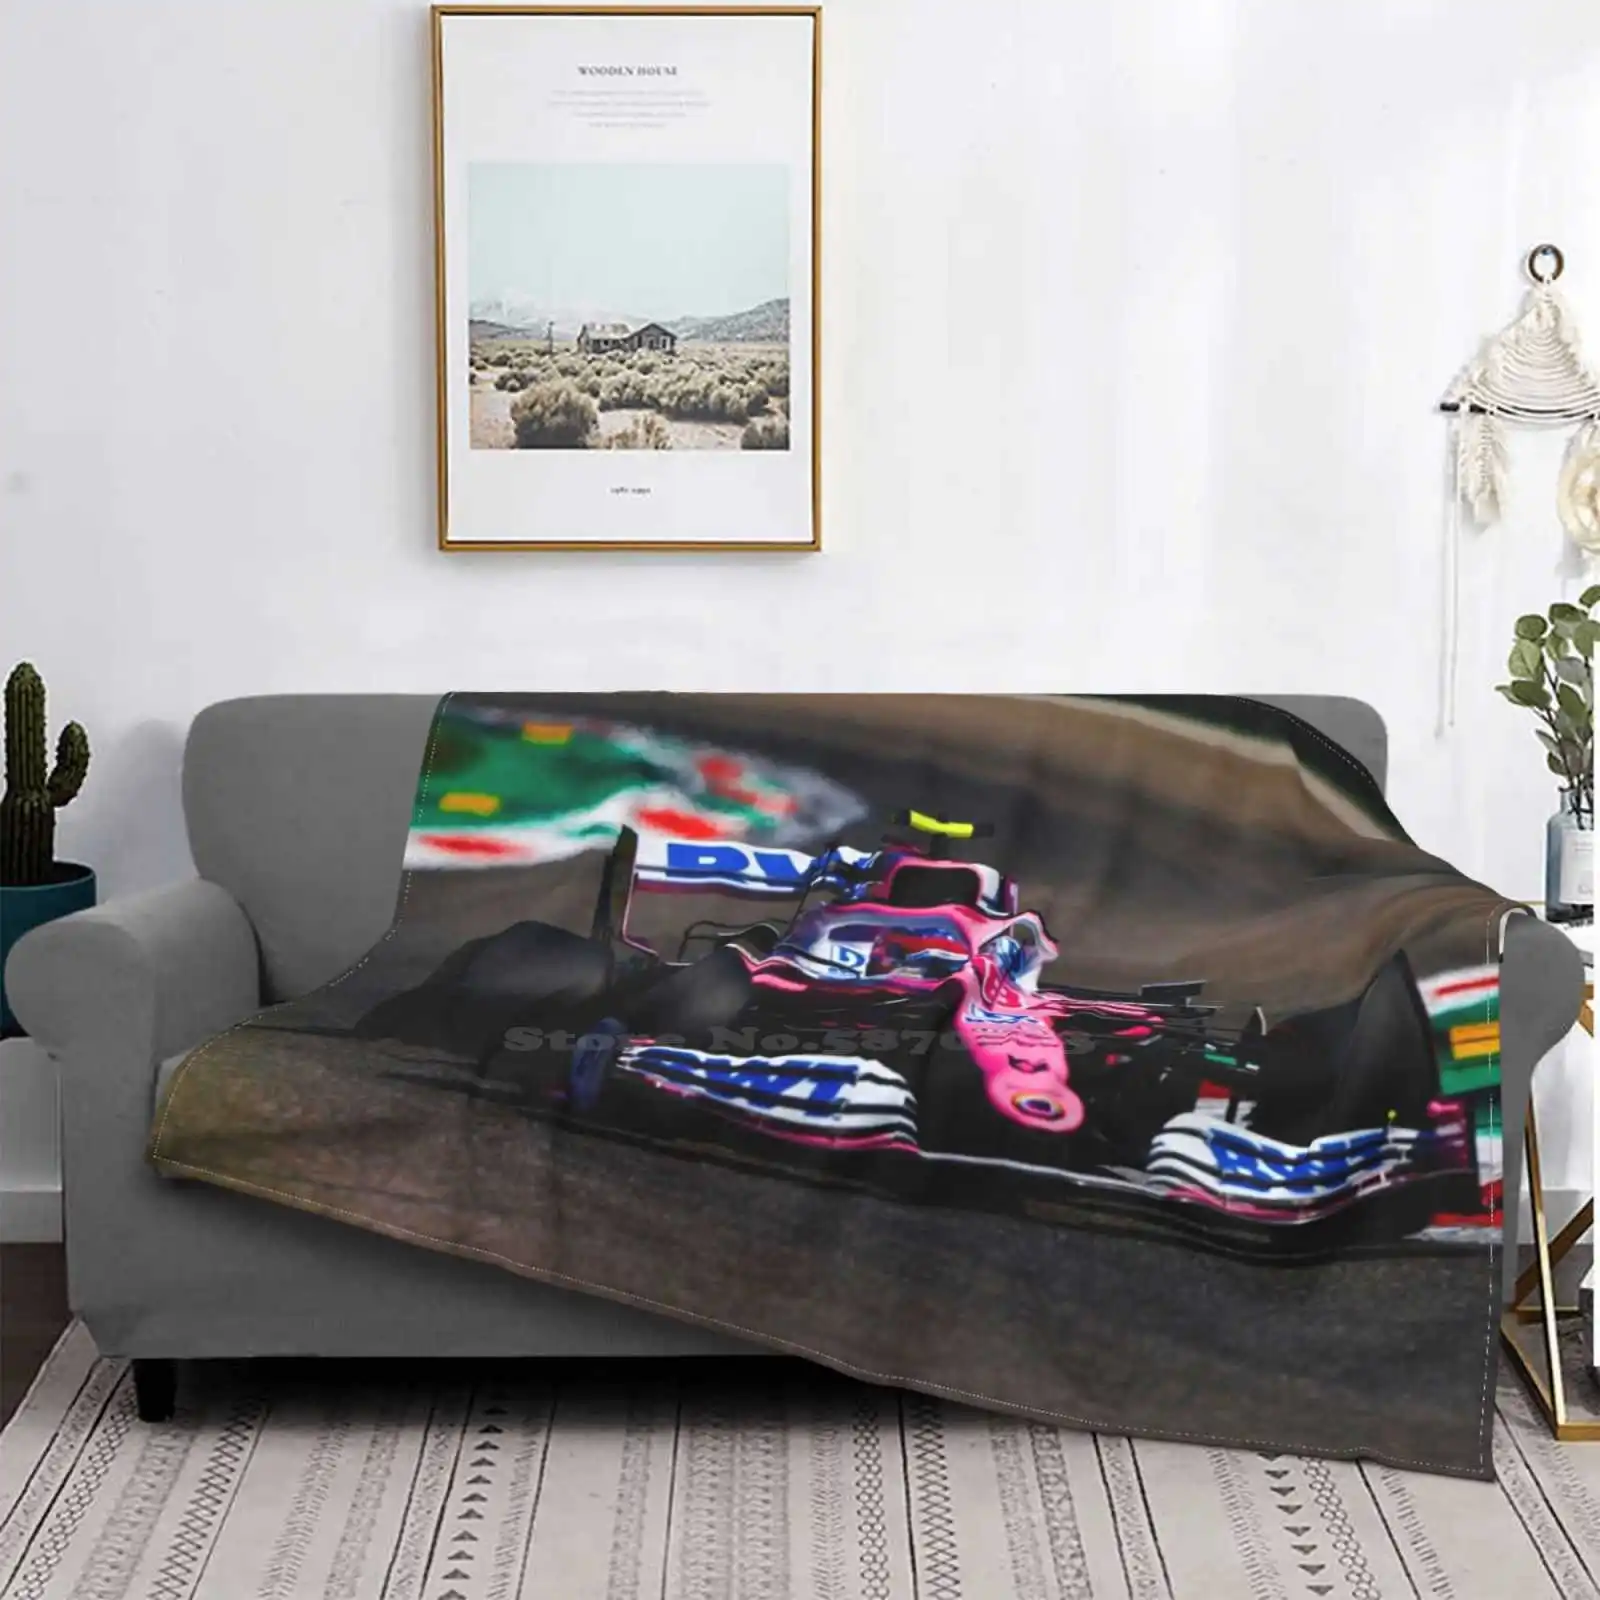 

Lance Stroll On His Way To The Podium During The 2020 Italian Grand Prix At Monza New Arrival Fashion Leisure Flannel Blanket